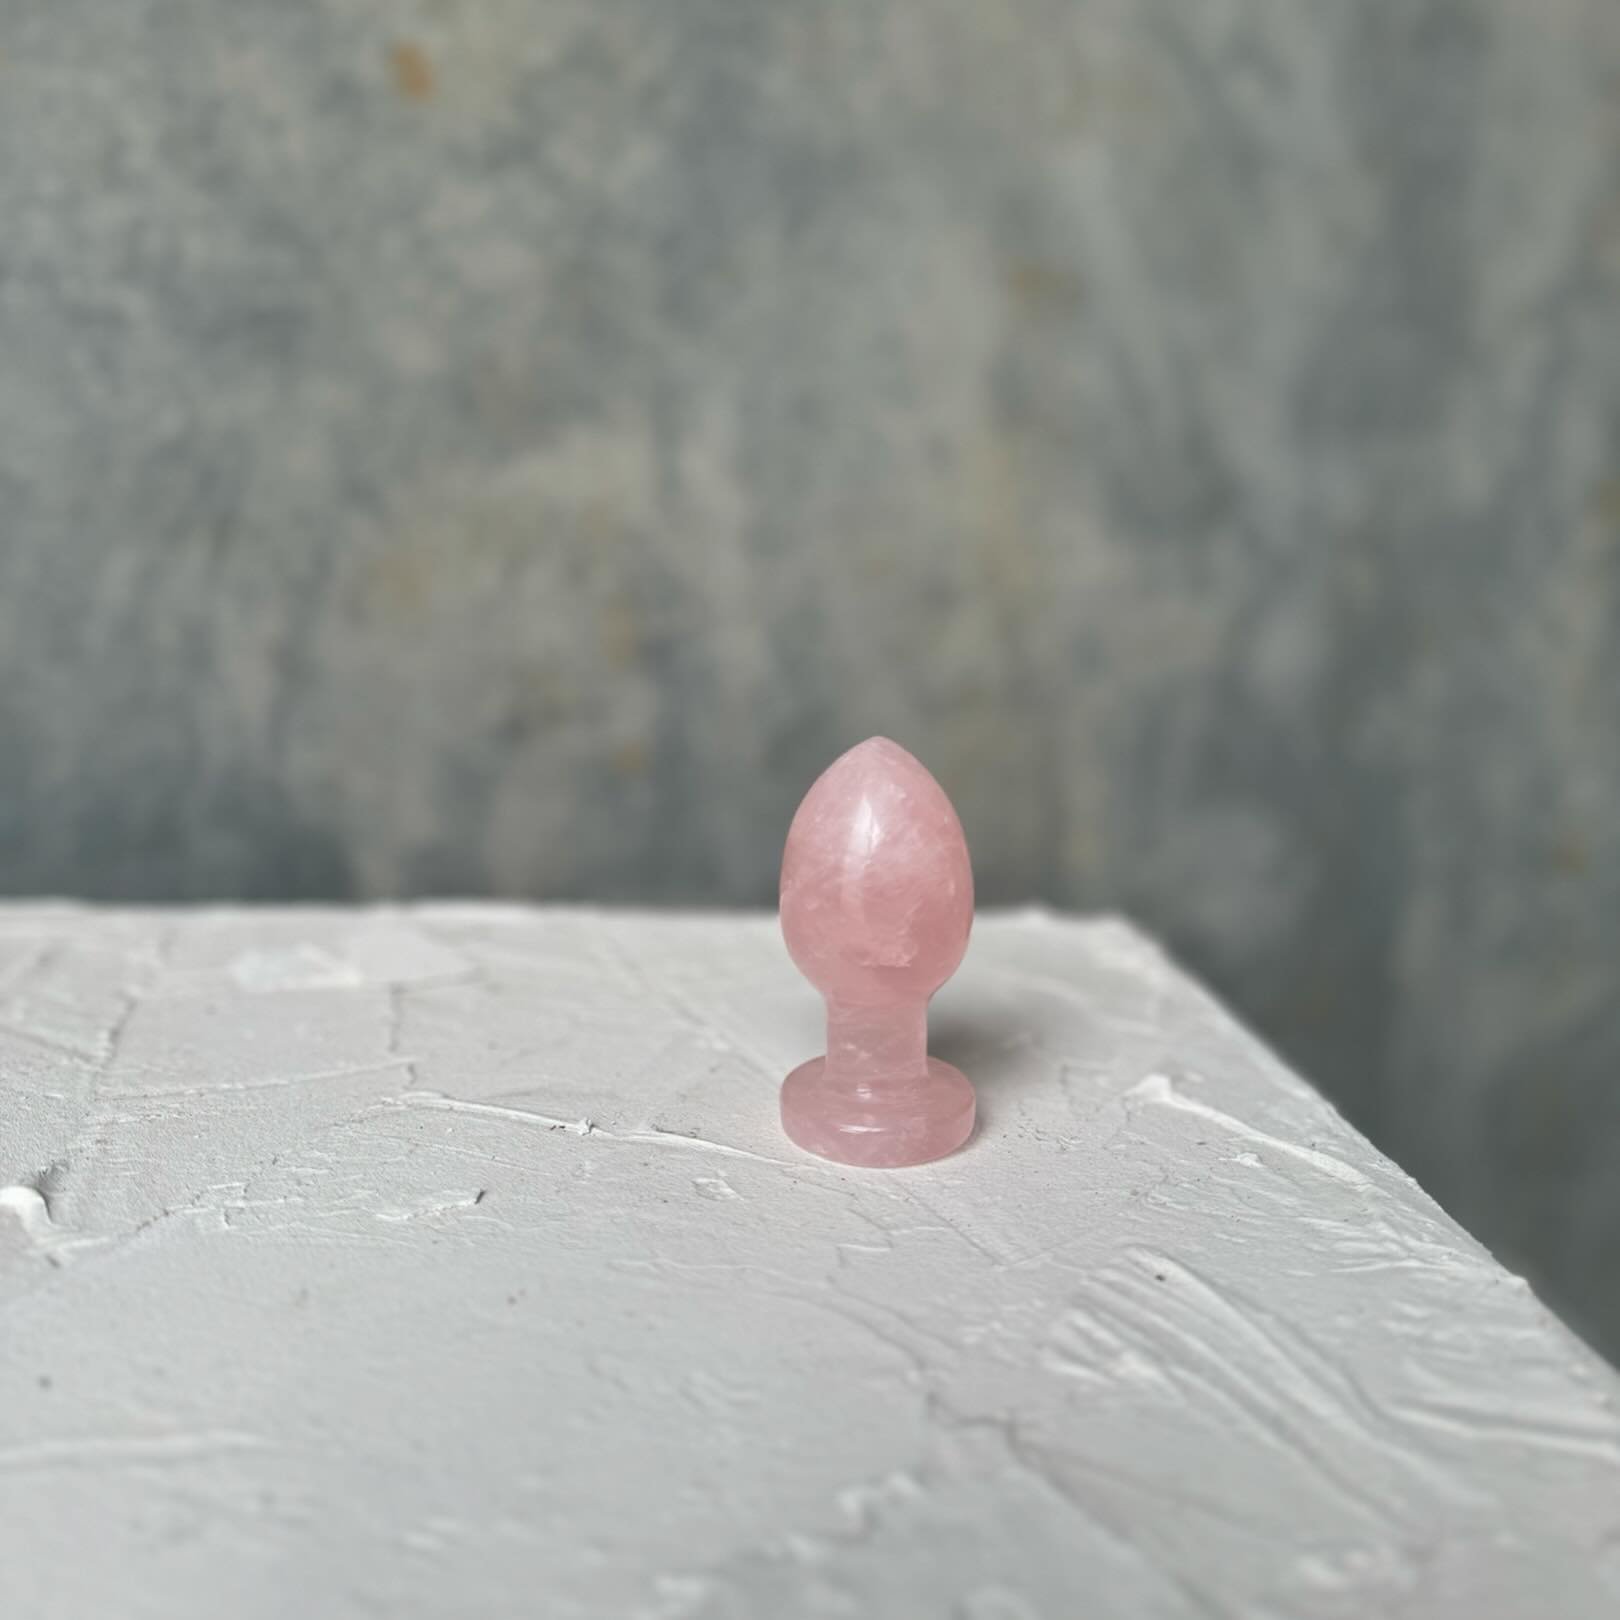 The Juliet Classic An^l Plug &mdash; thoughtfully &amp; intentionally crafted to provide pleasure and awaken the root chakra through an^l stimulation. With its flared base and tear-drop-shaped bulbous end, this carefully crafted plug offers a smooth 